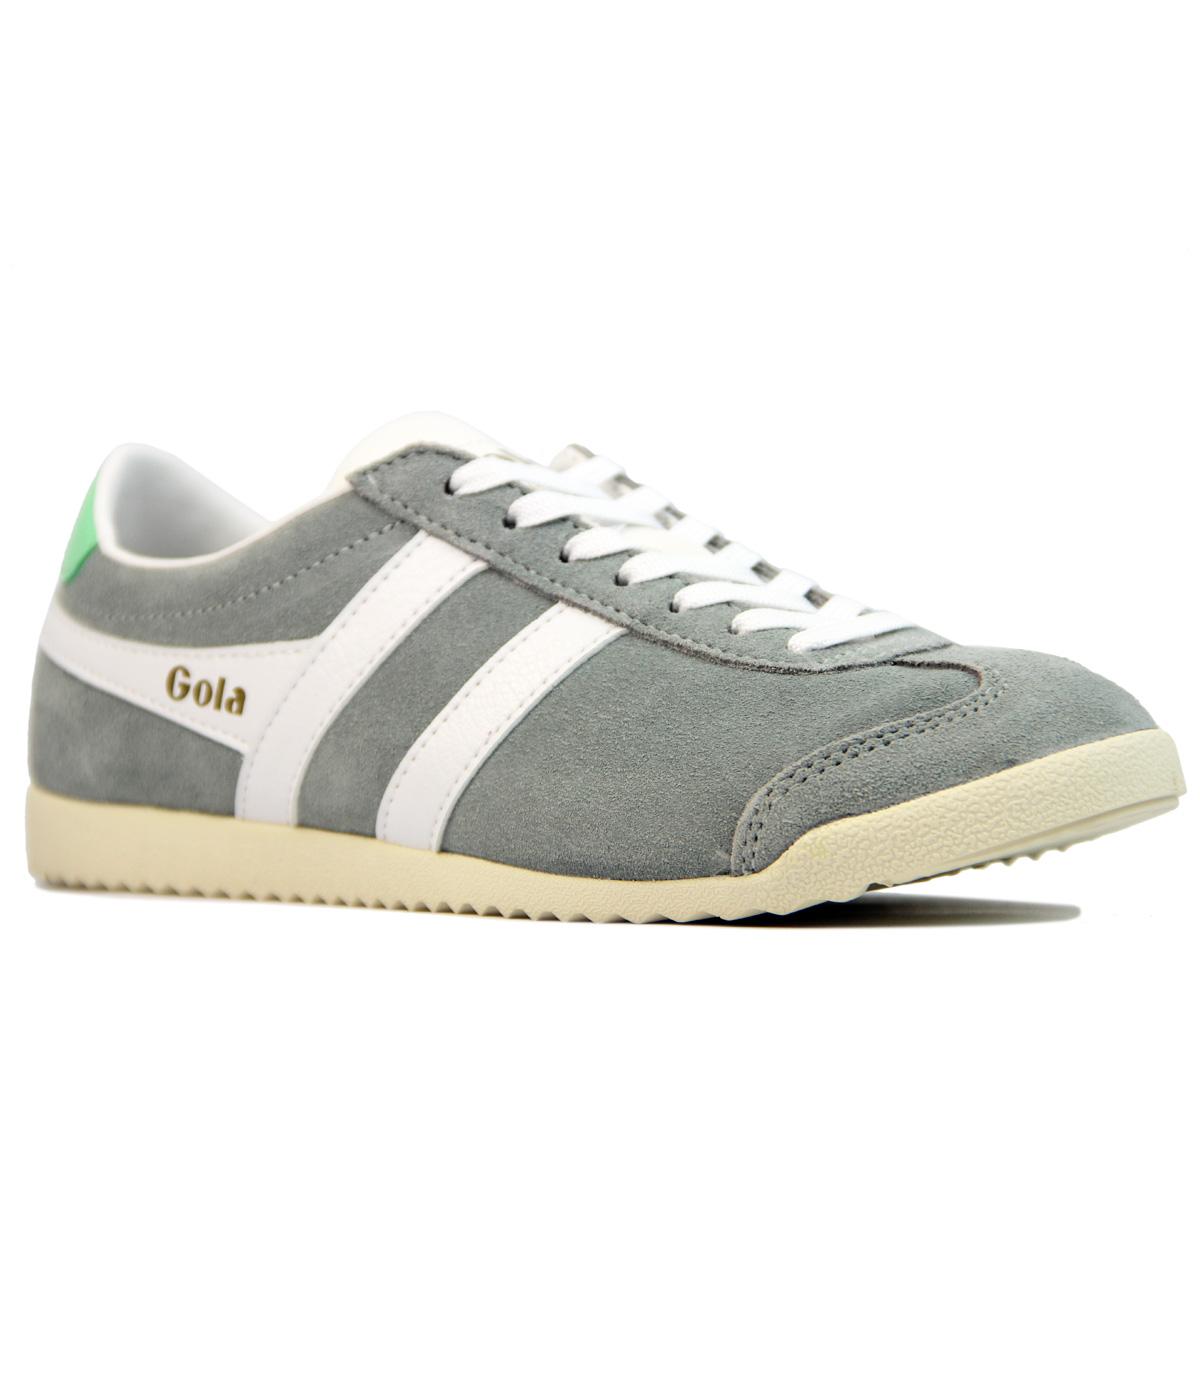 GOLA Bullet Womens Retro Suede Trainers GREY